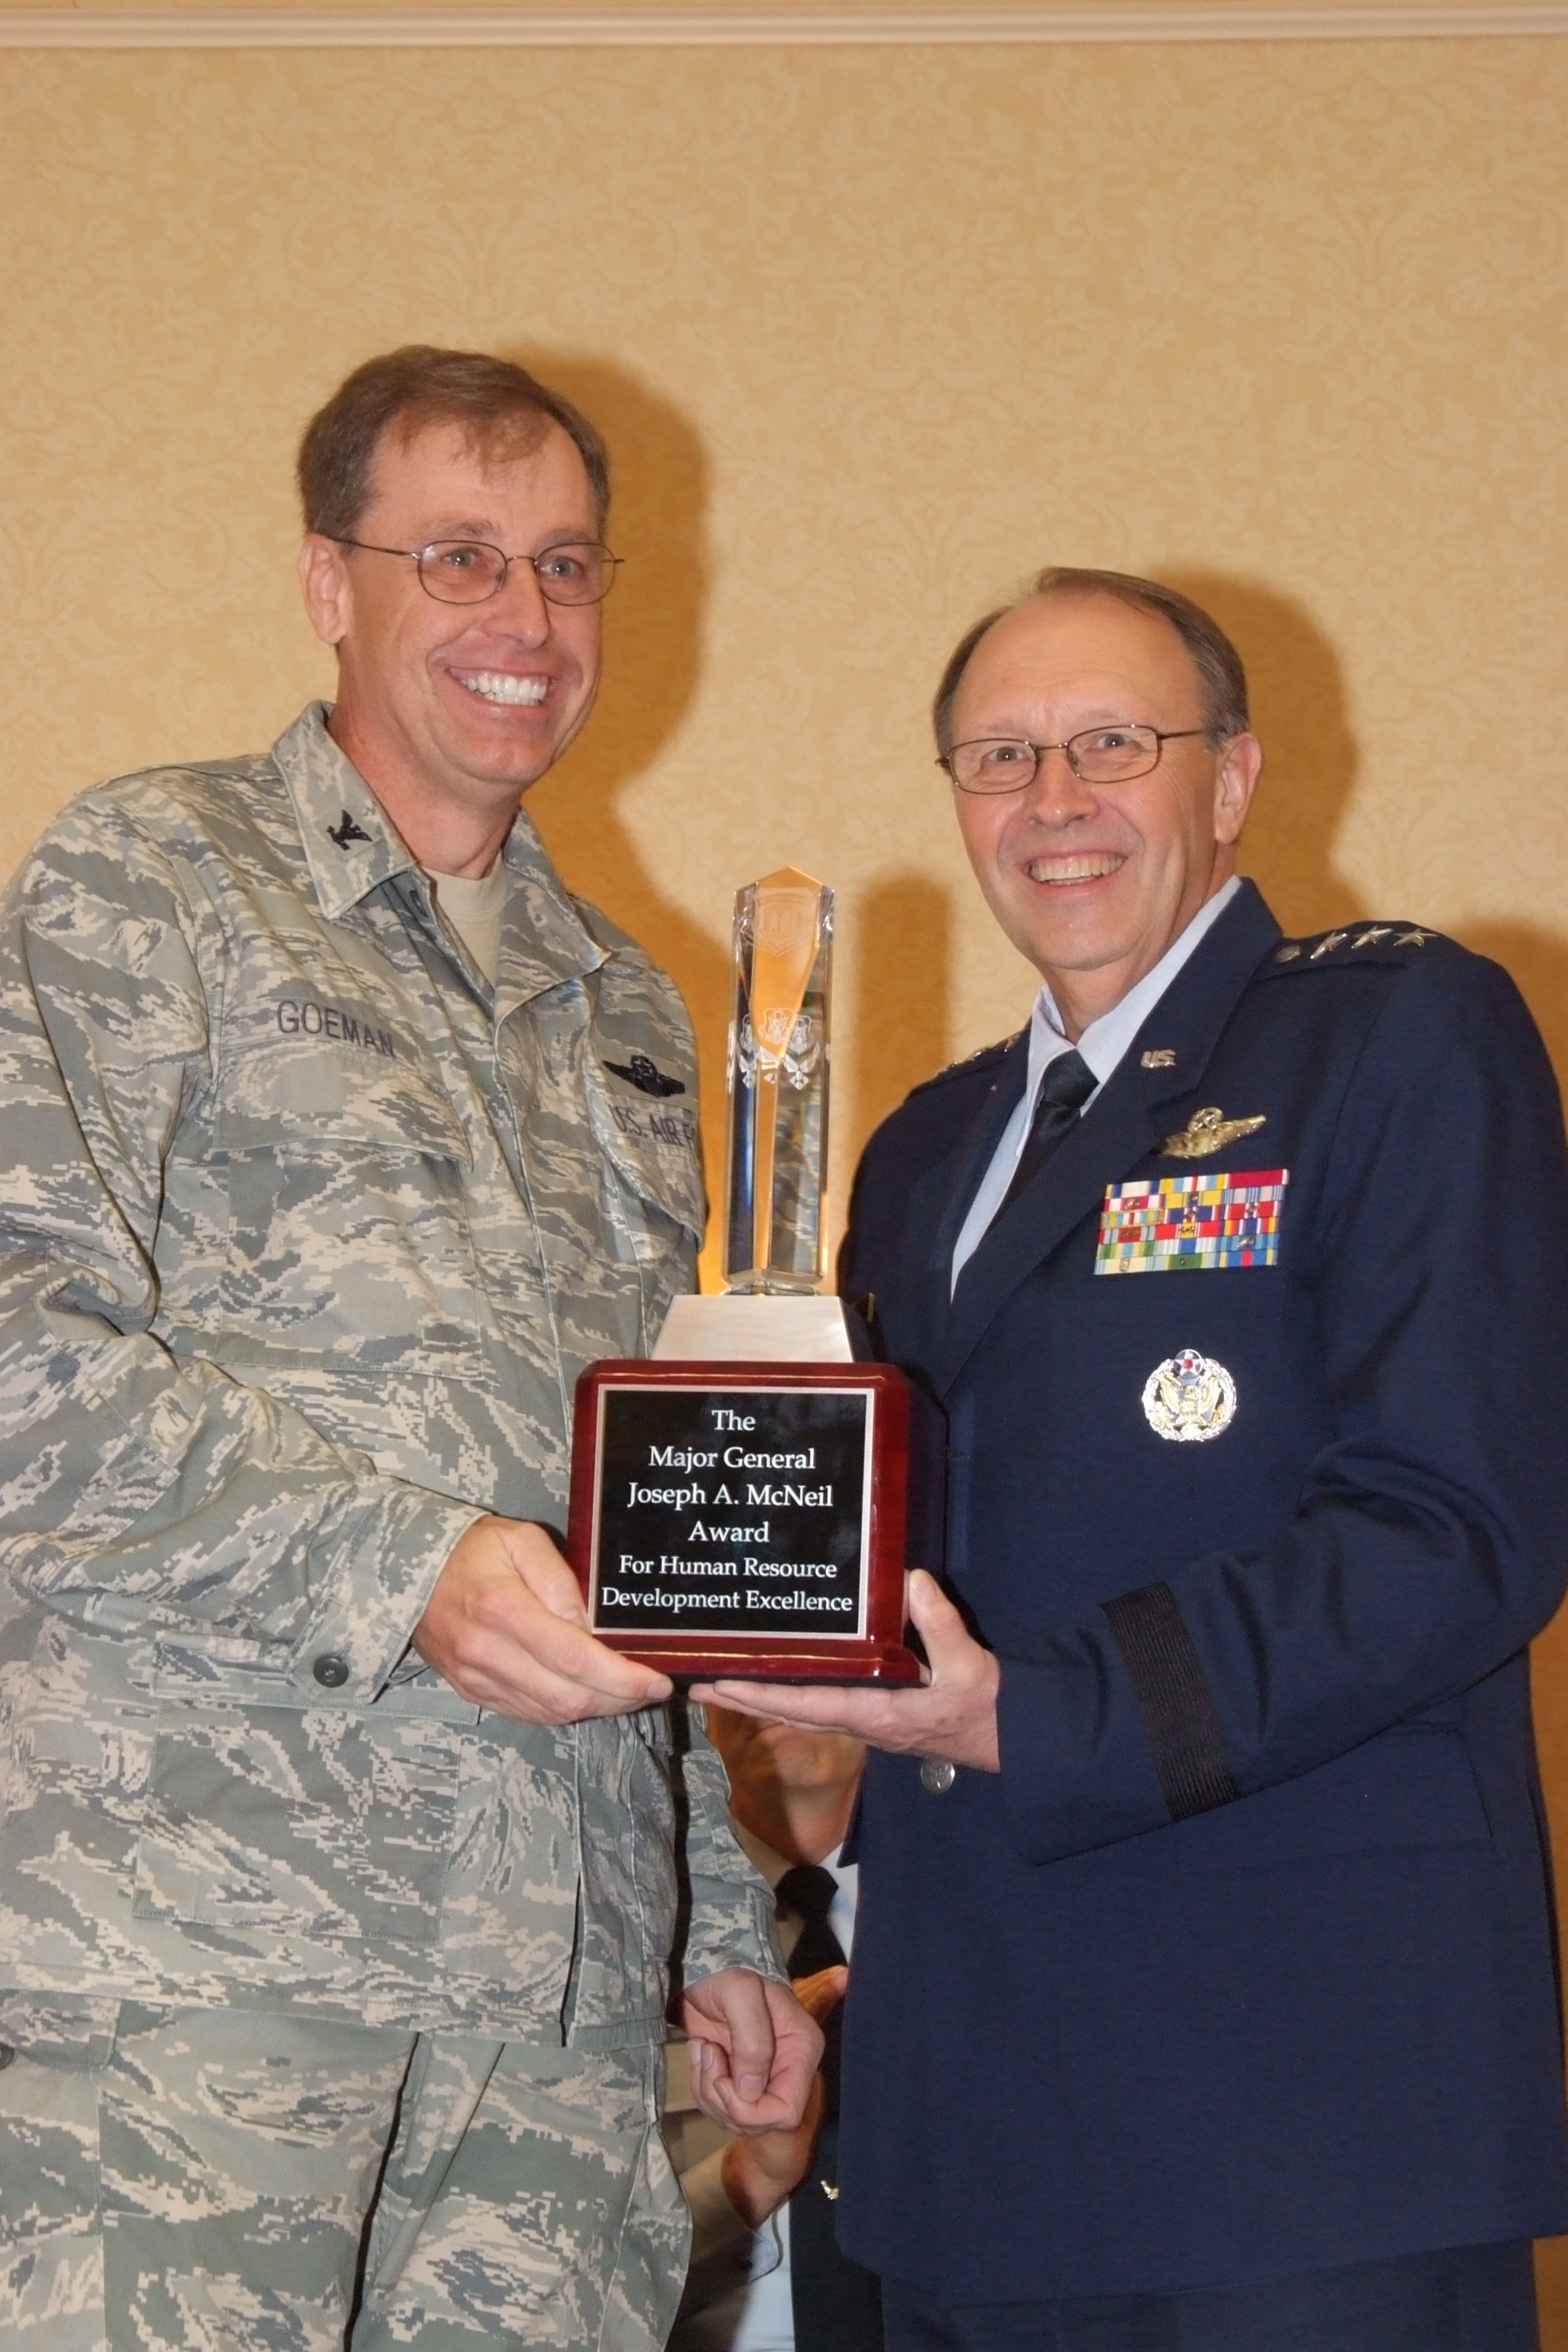 McNeil Award goes to the 445th Airlift Wing